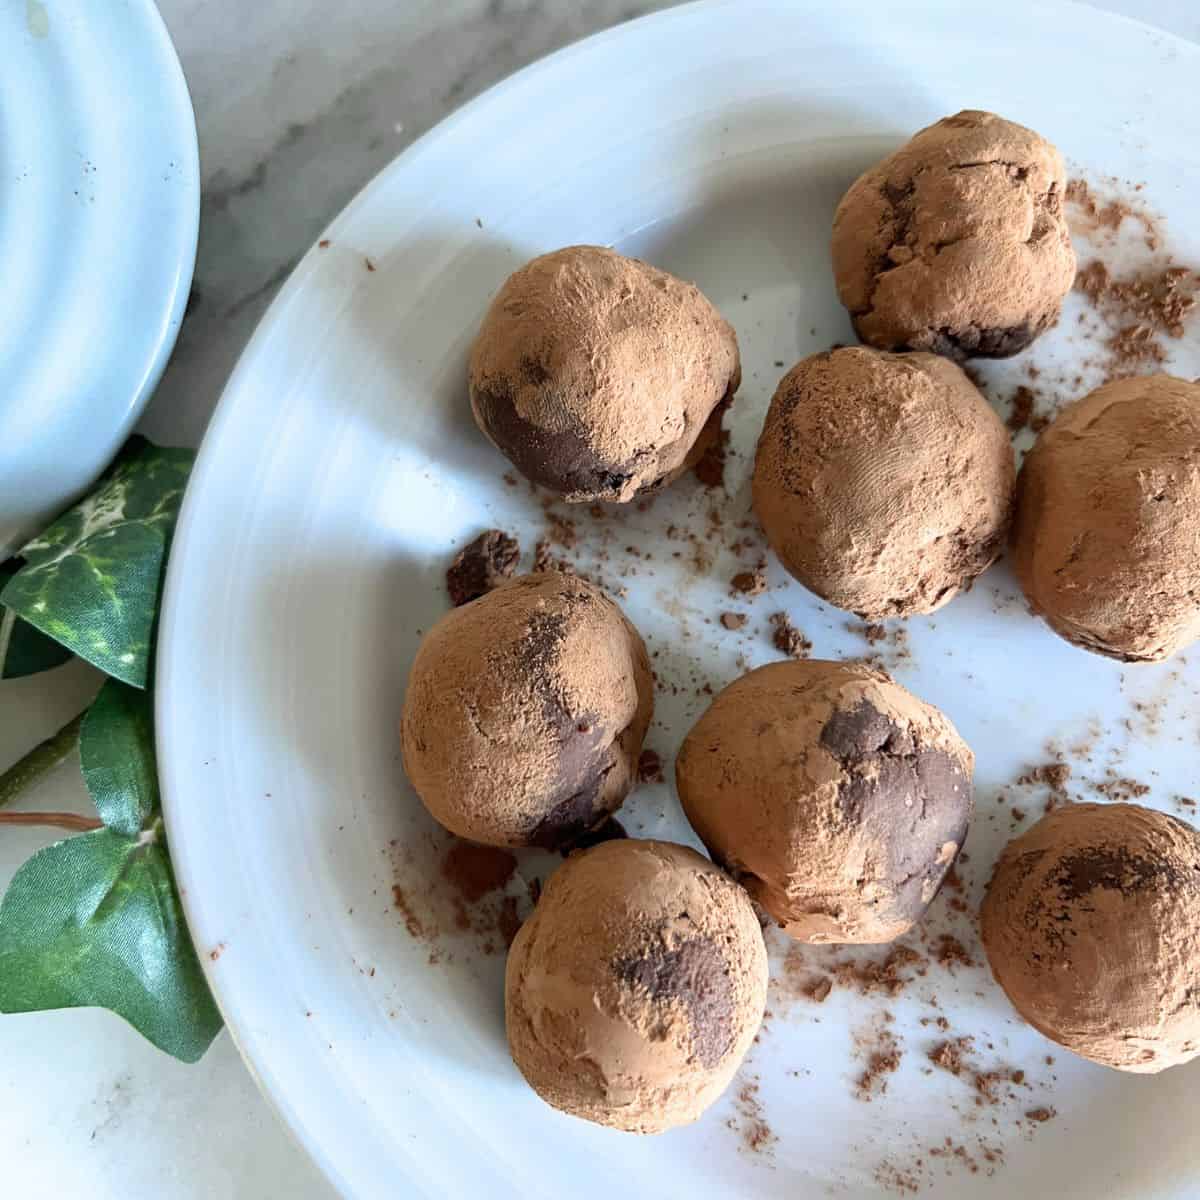 Decadent chocolate truffles with rum-soaked raisins. Such an easy and fancy treat or dessert to have. 